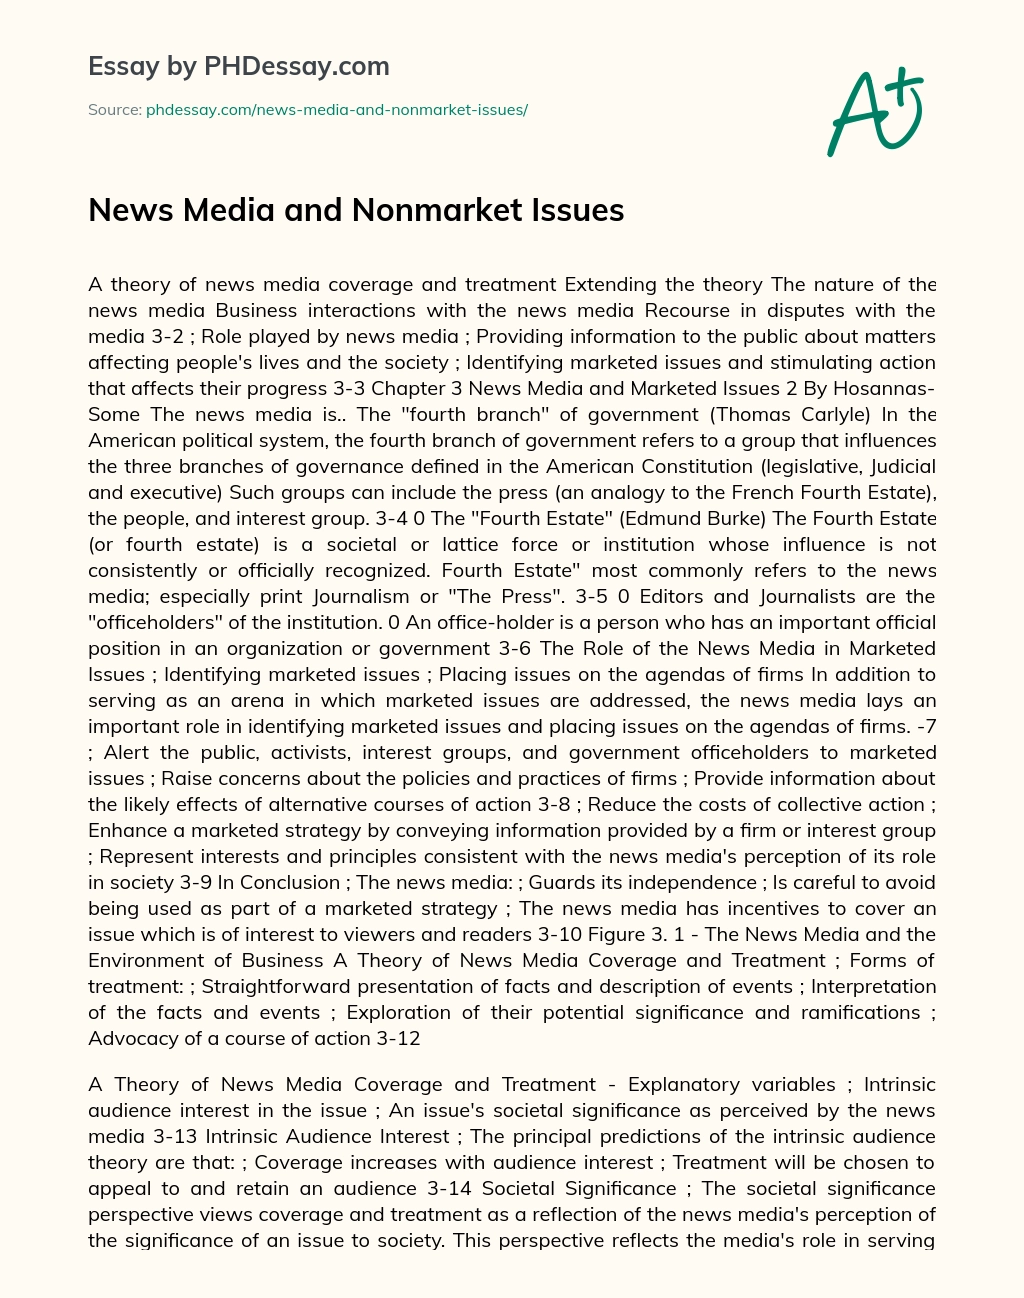 News Media and Nonmarket Issues essay